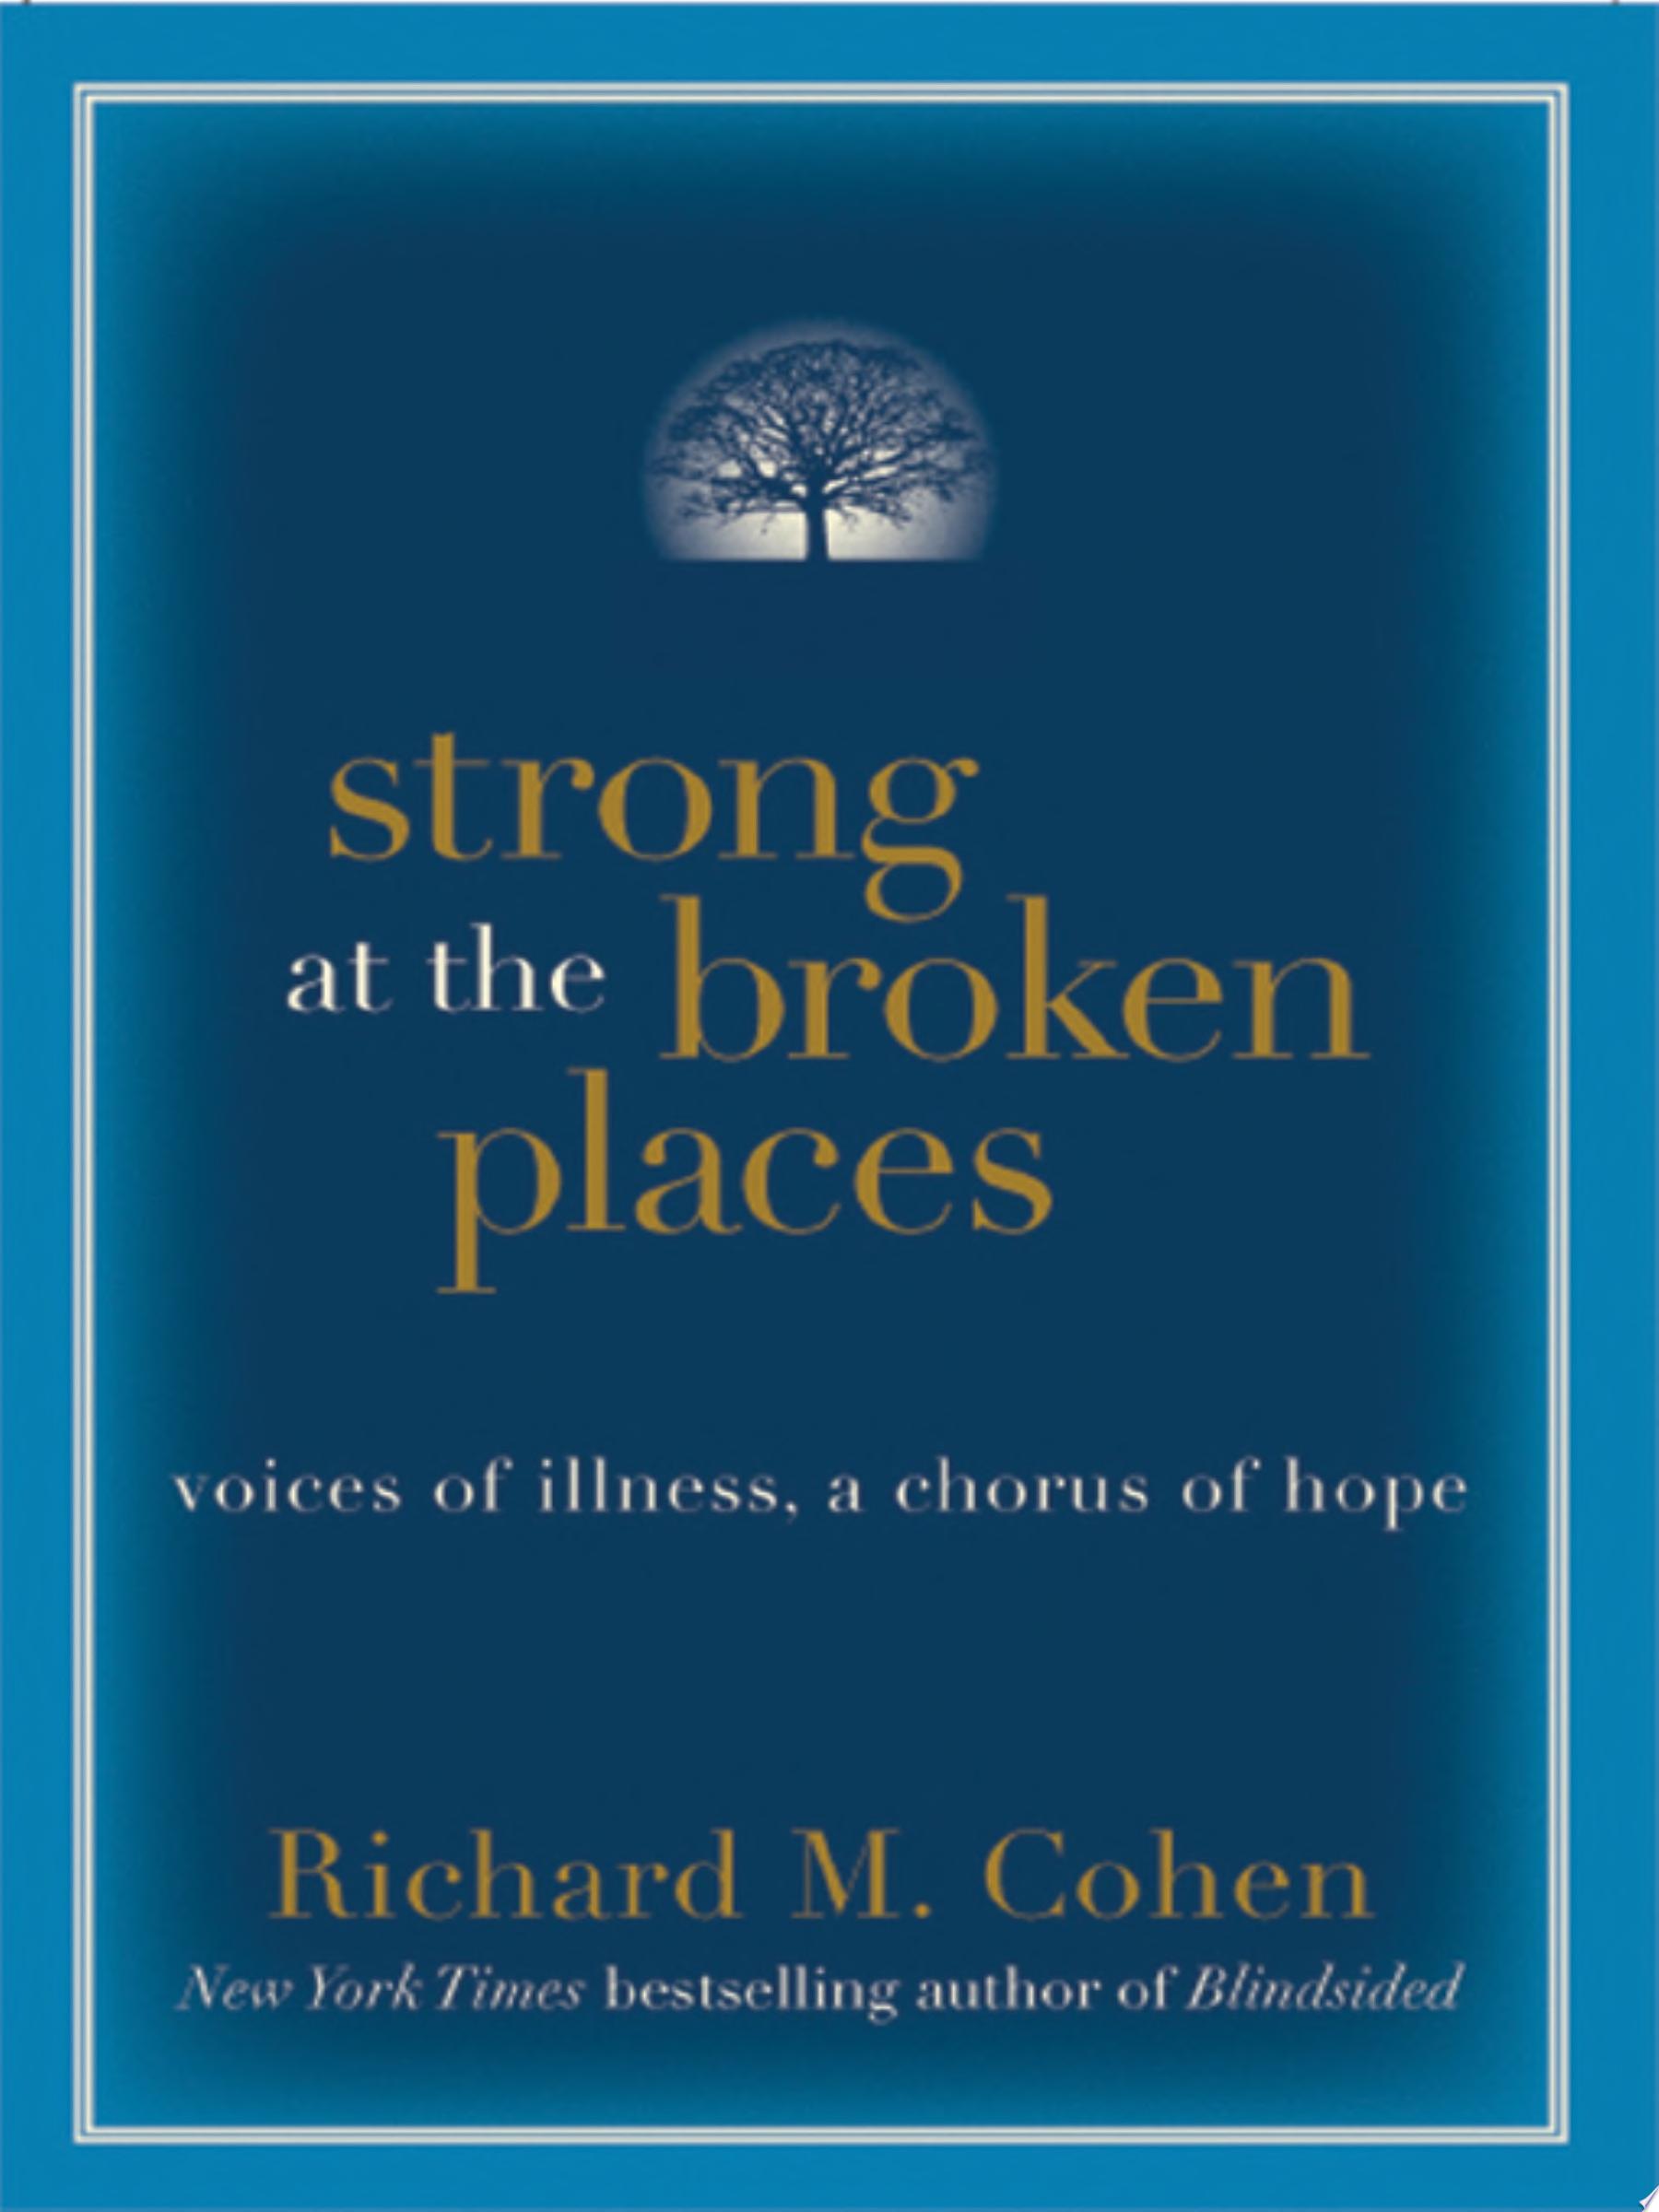 Image for "Strong at the Broken Places"